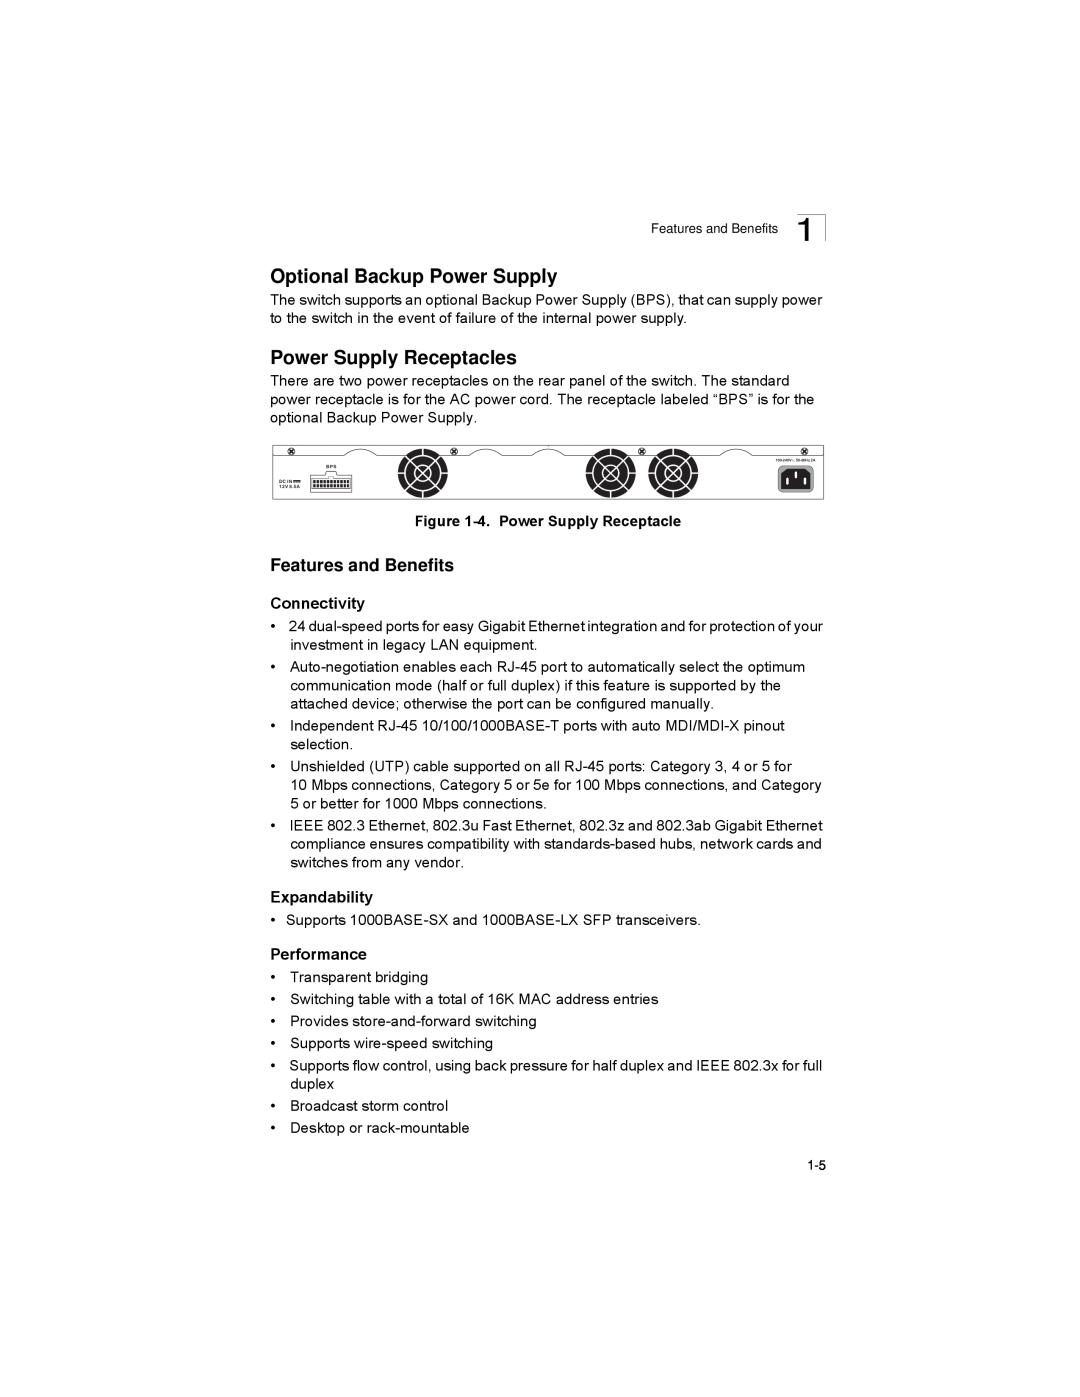 Alcatel-Lucent 6300-24 manual Optional Backup Power Supply, Power Supply Receptacles, Features and Benefits 